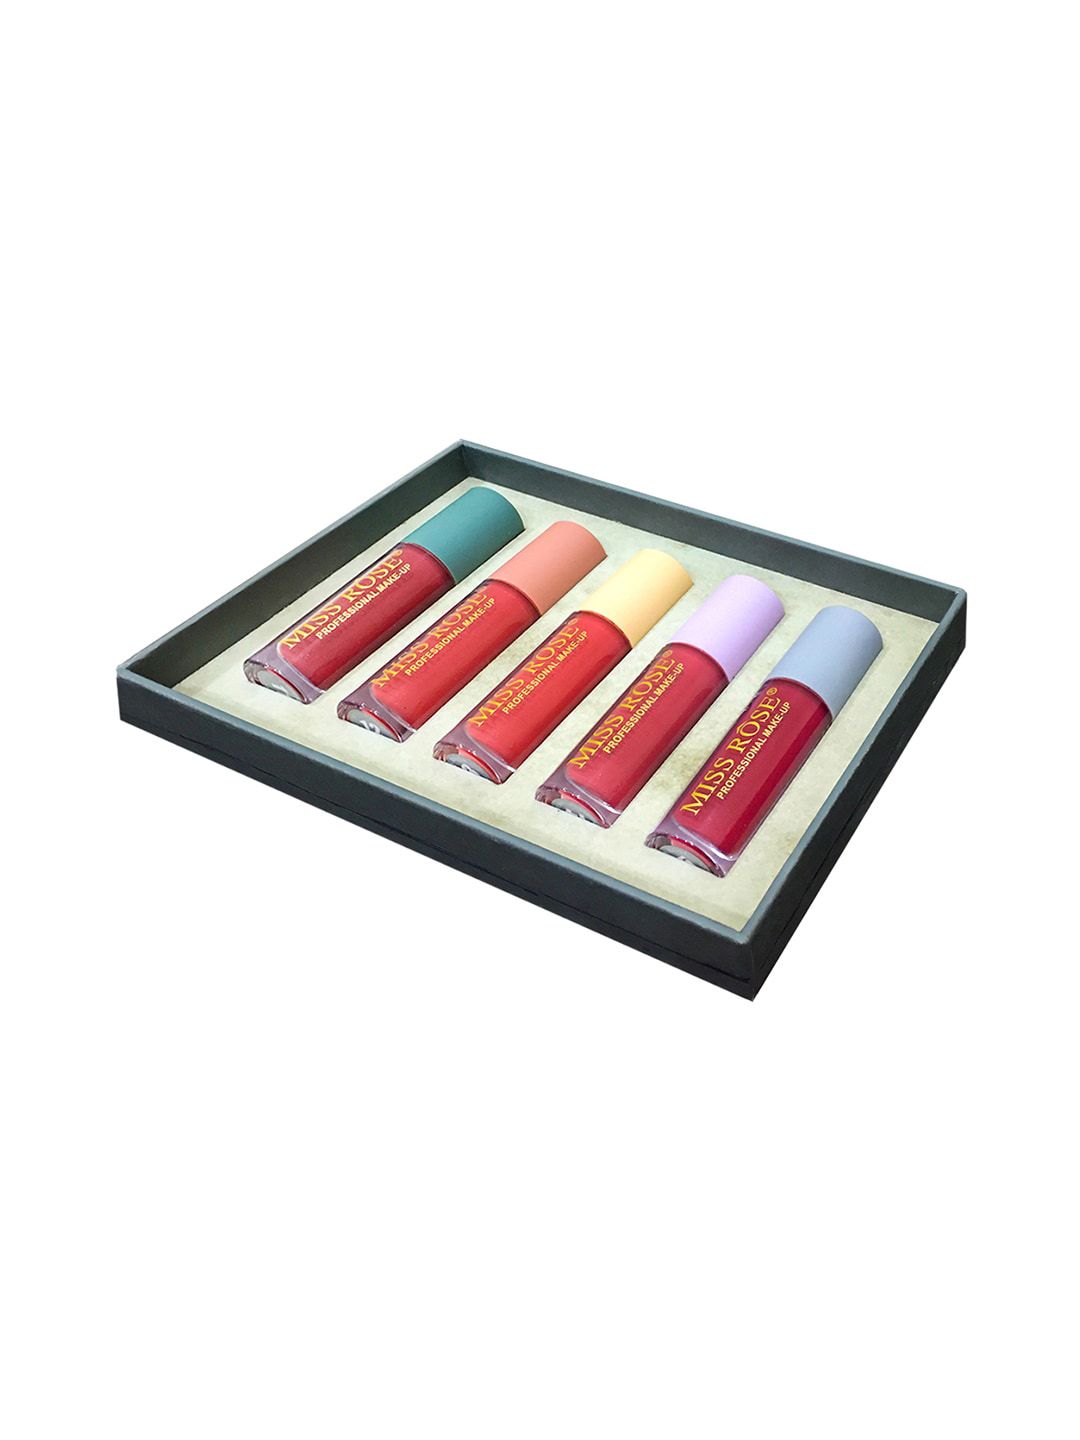 MISS ROSE Set Of 6 Matte Liquid Lipgloss 7701-005Z4 Price in India